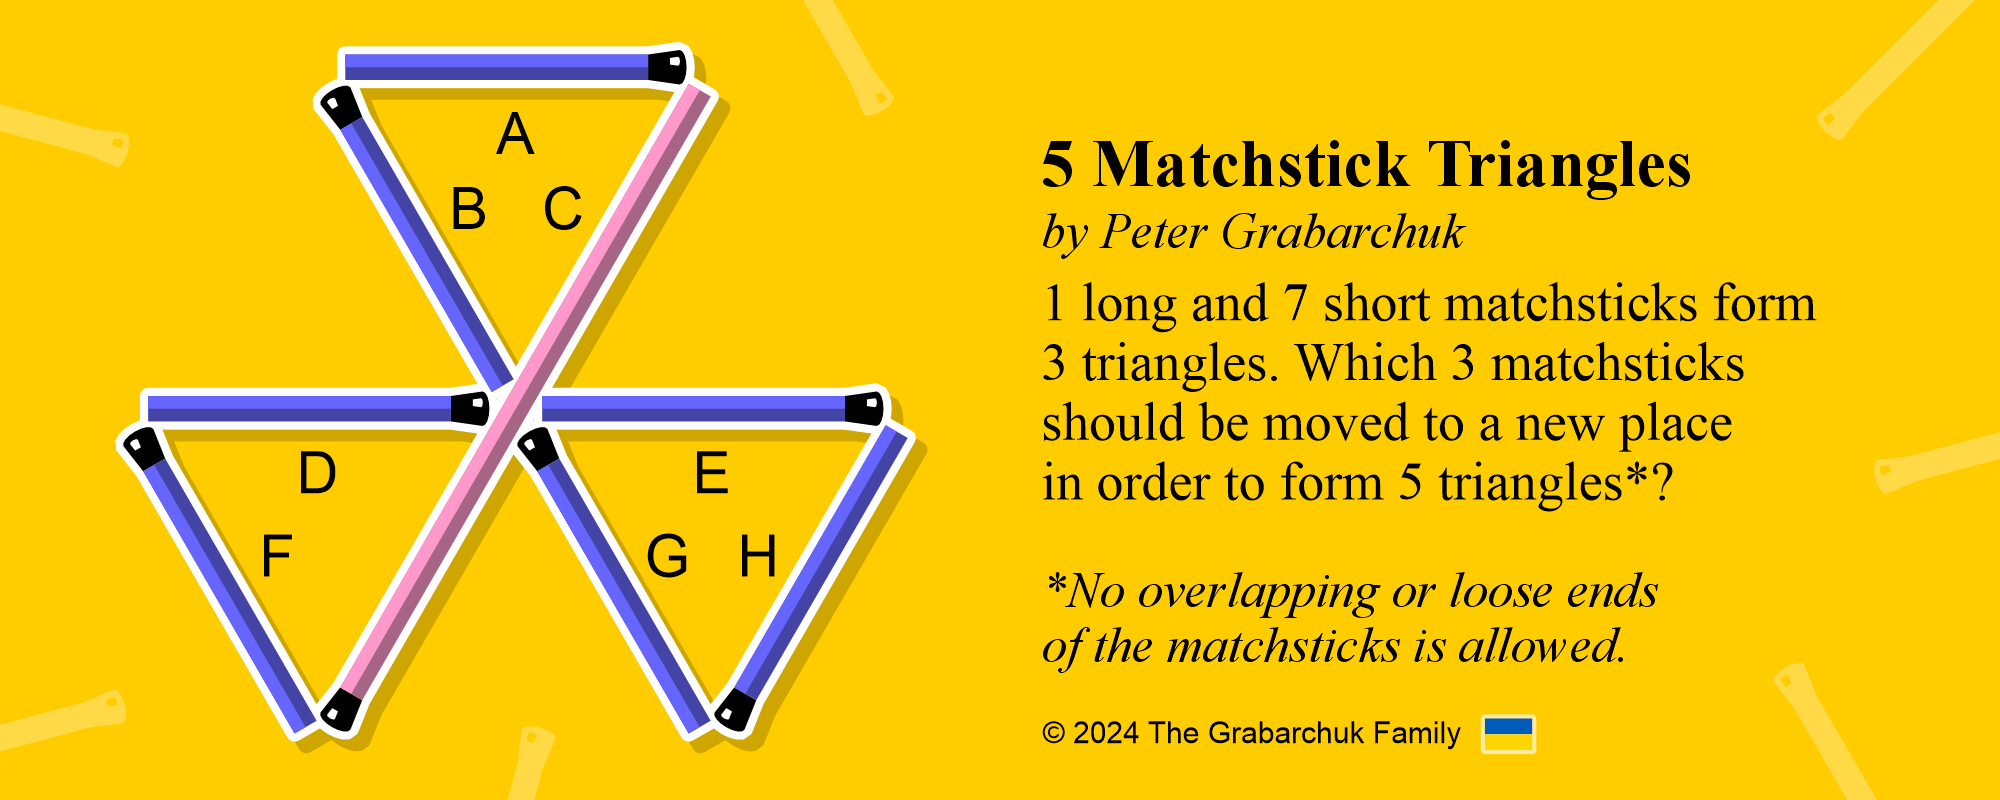 5 Matchstick Triangles by Peter Grabarchuk